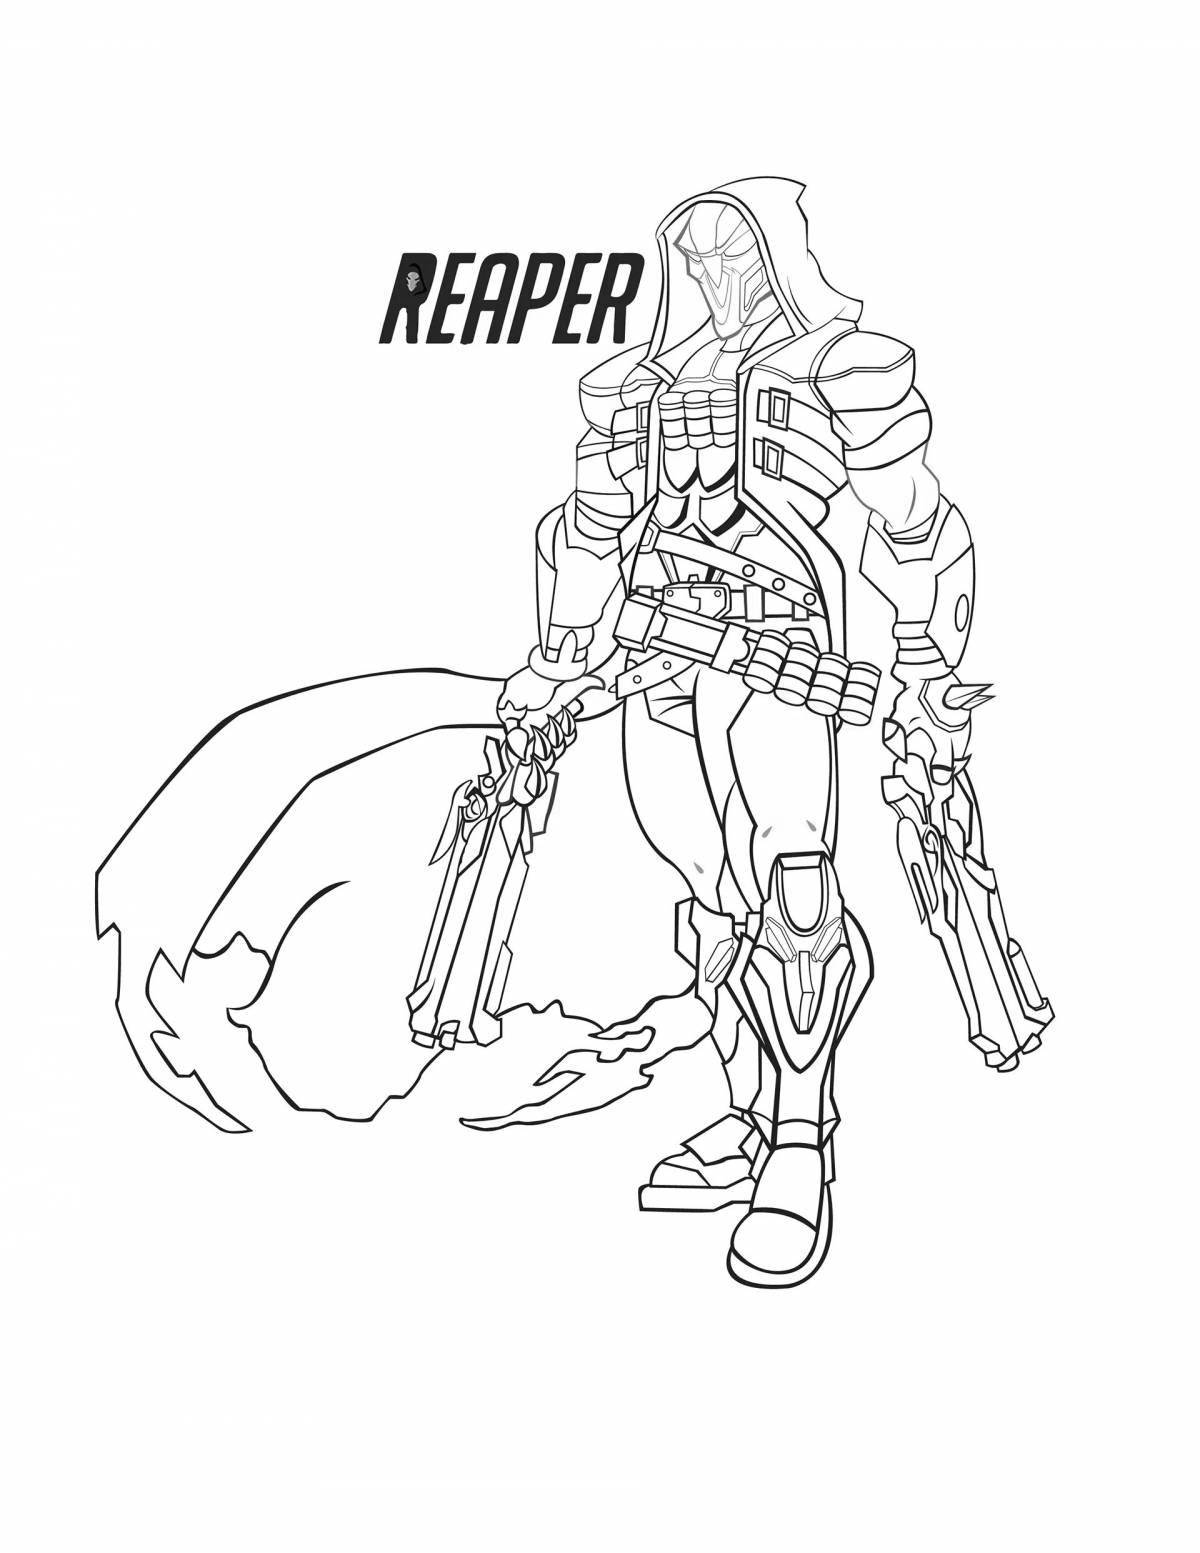 Charming overwatch coloring book